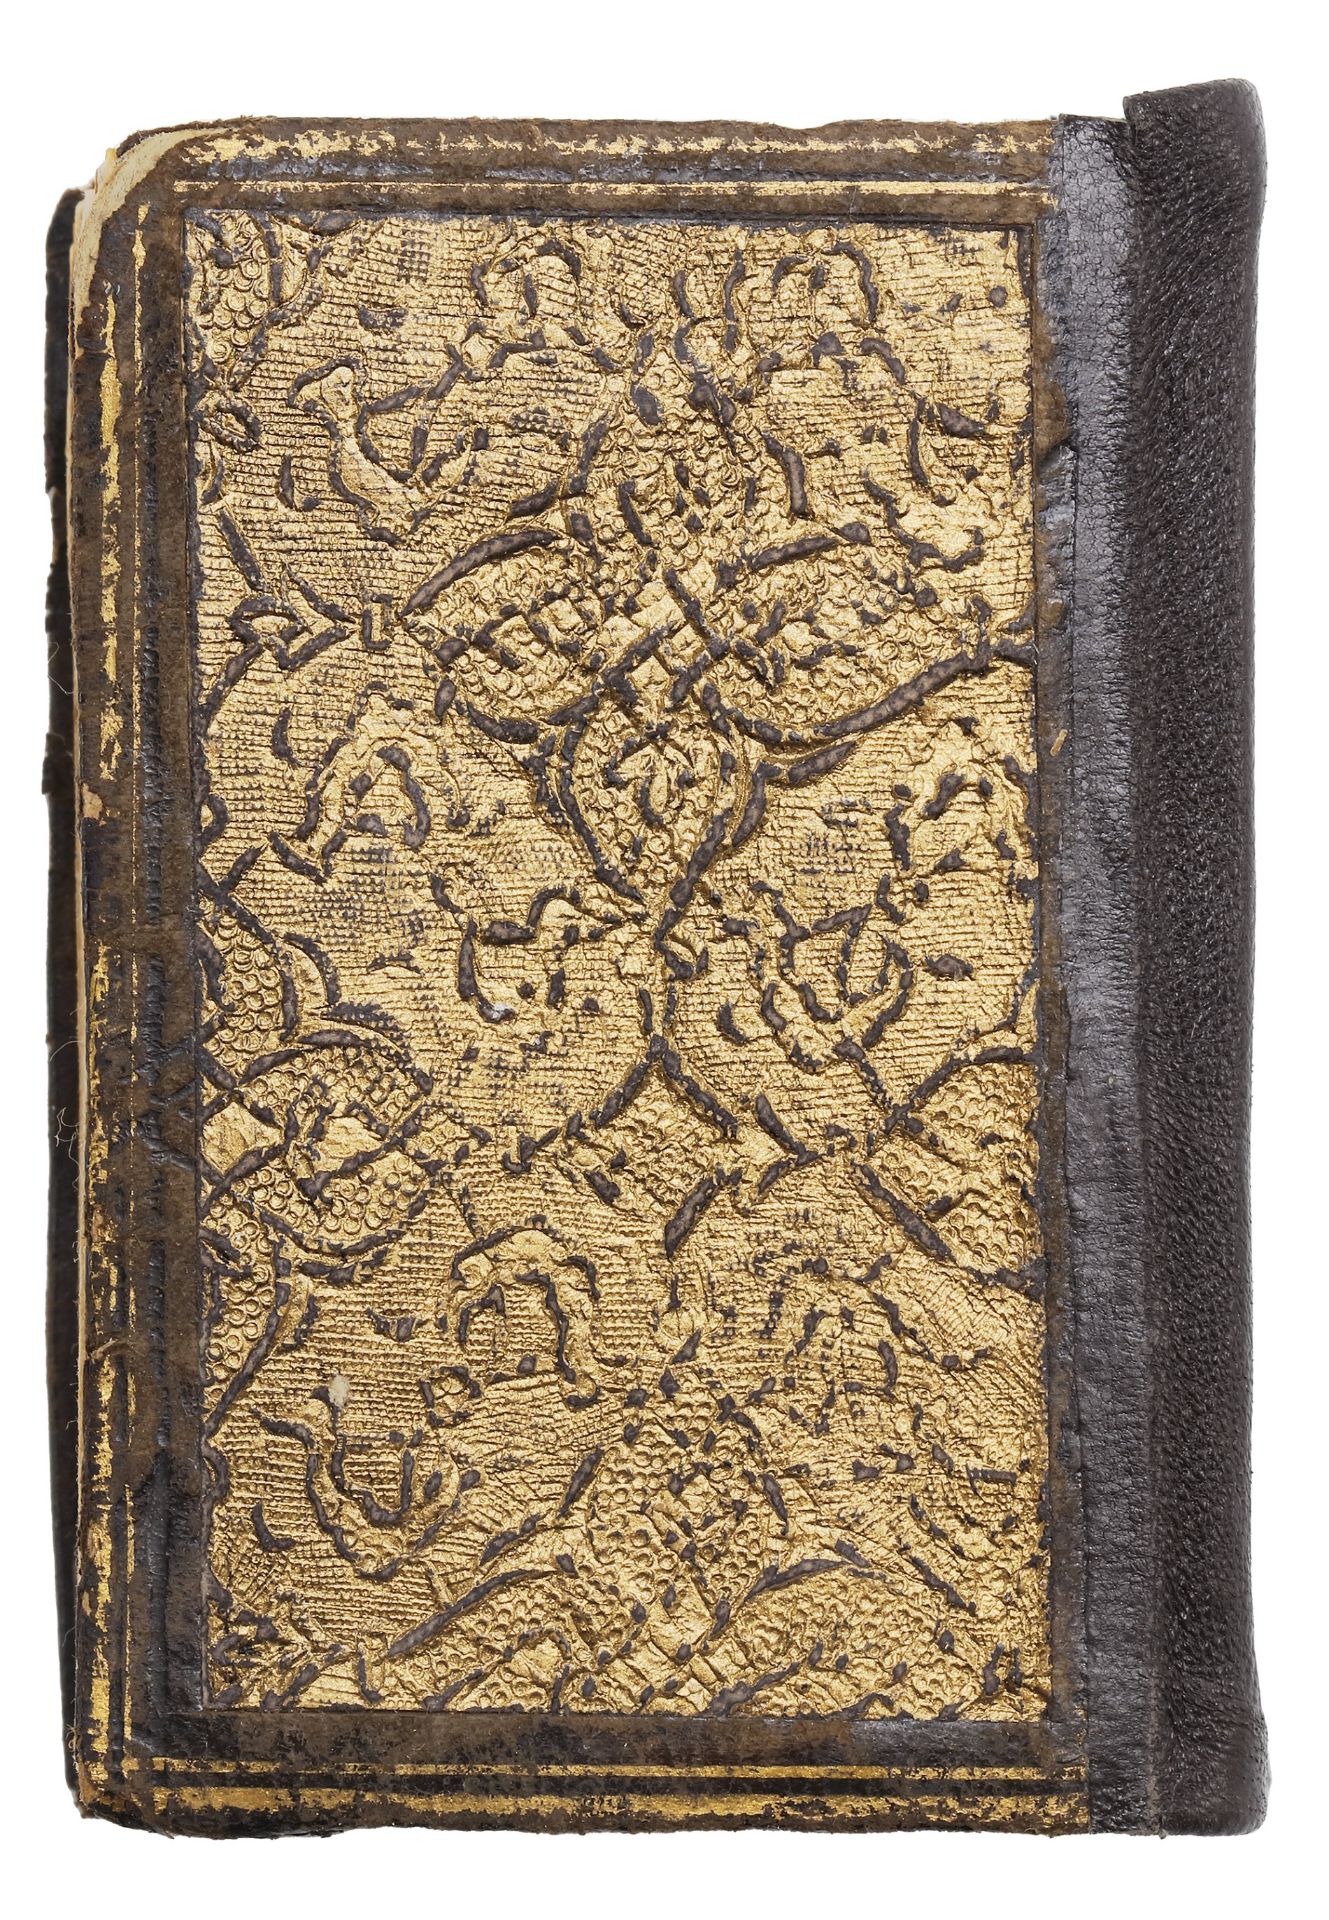 AN OTTOMAN MINIATURE QURAN COPIED BY MAHMOUD SULTANI IN 846 AH/1442 AD - Image 8 of 8